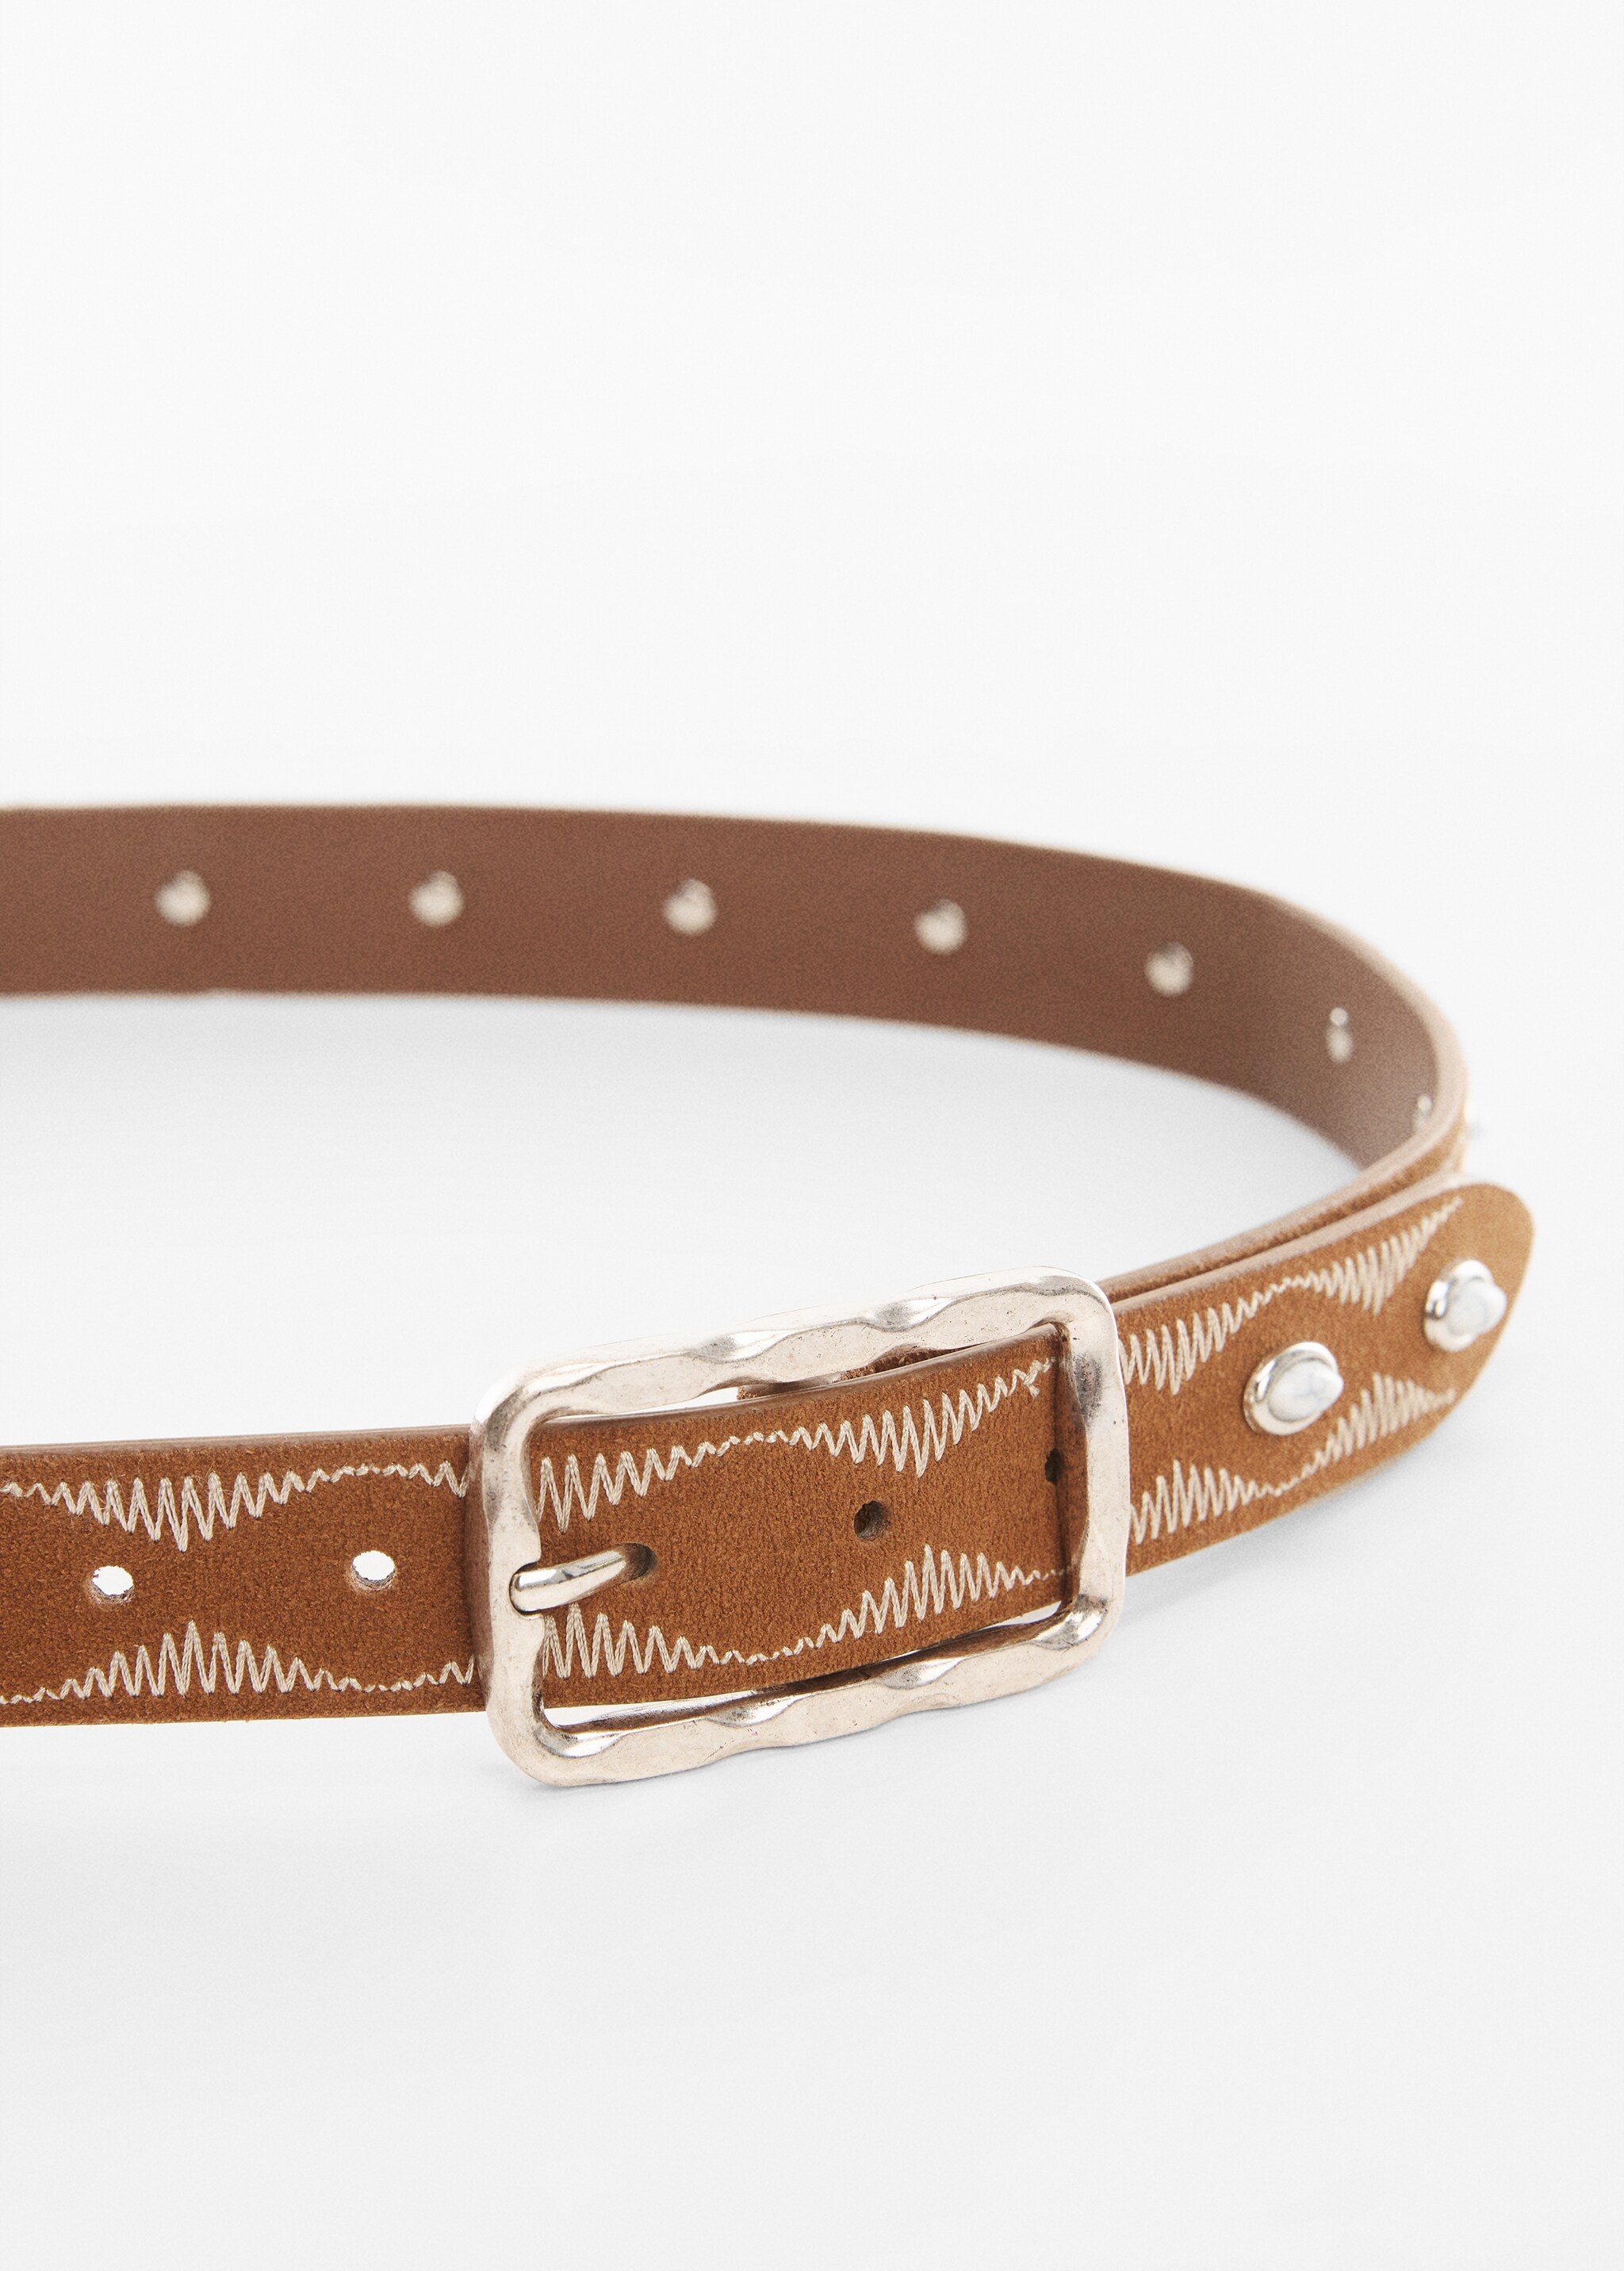 Embroidered leather belt - Details of the article 2